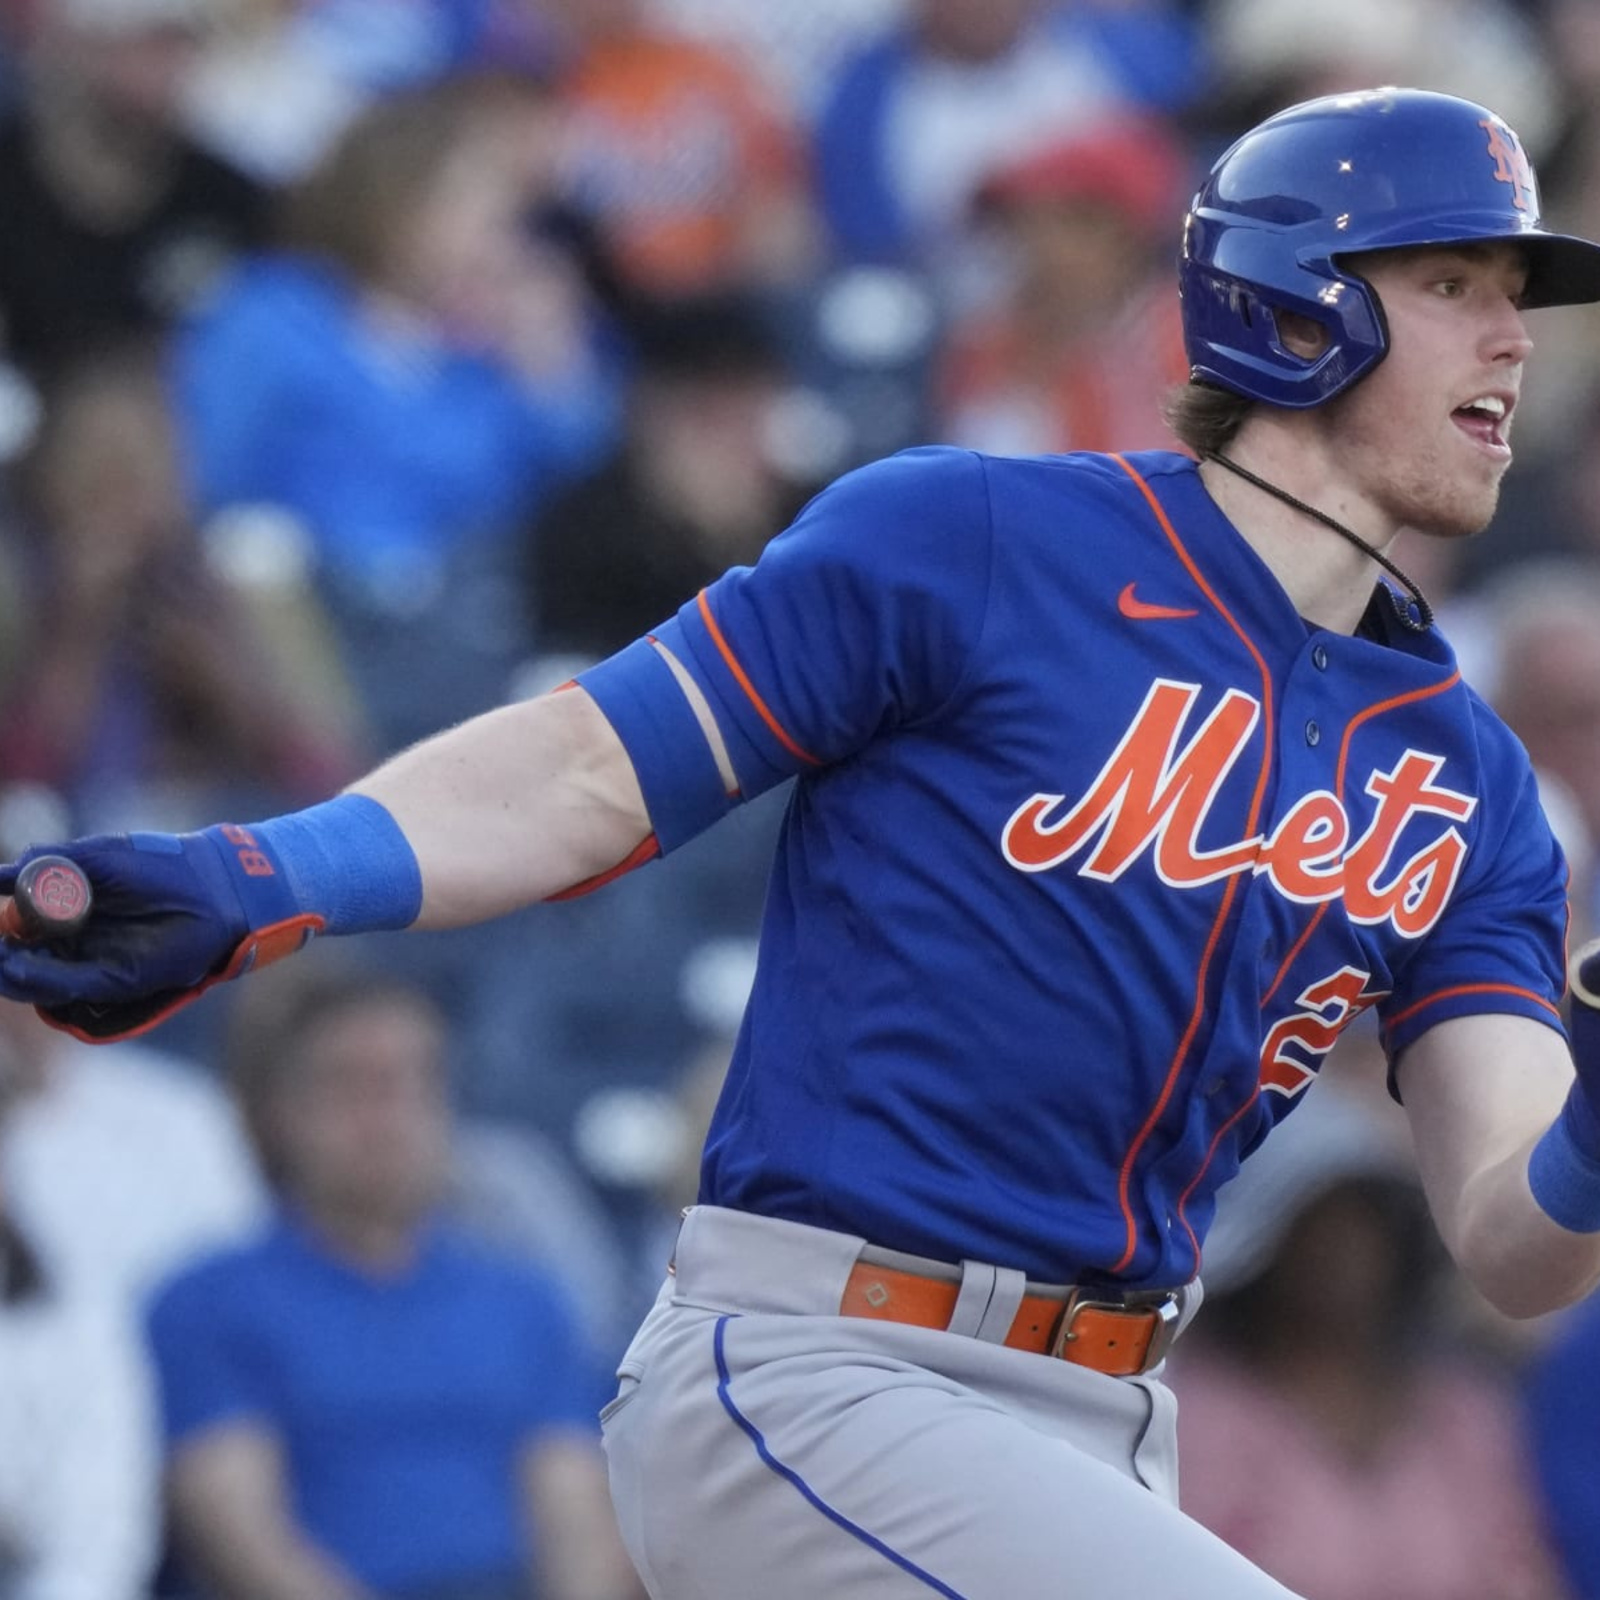 Is red-hot Mets prospect headed for majors after slam against